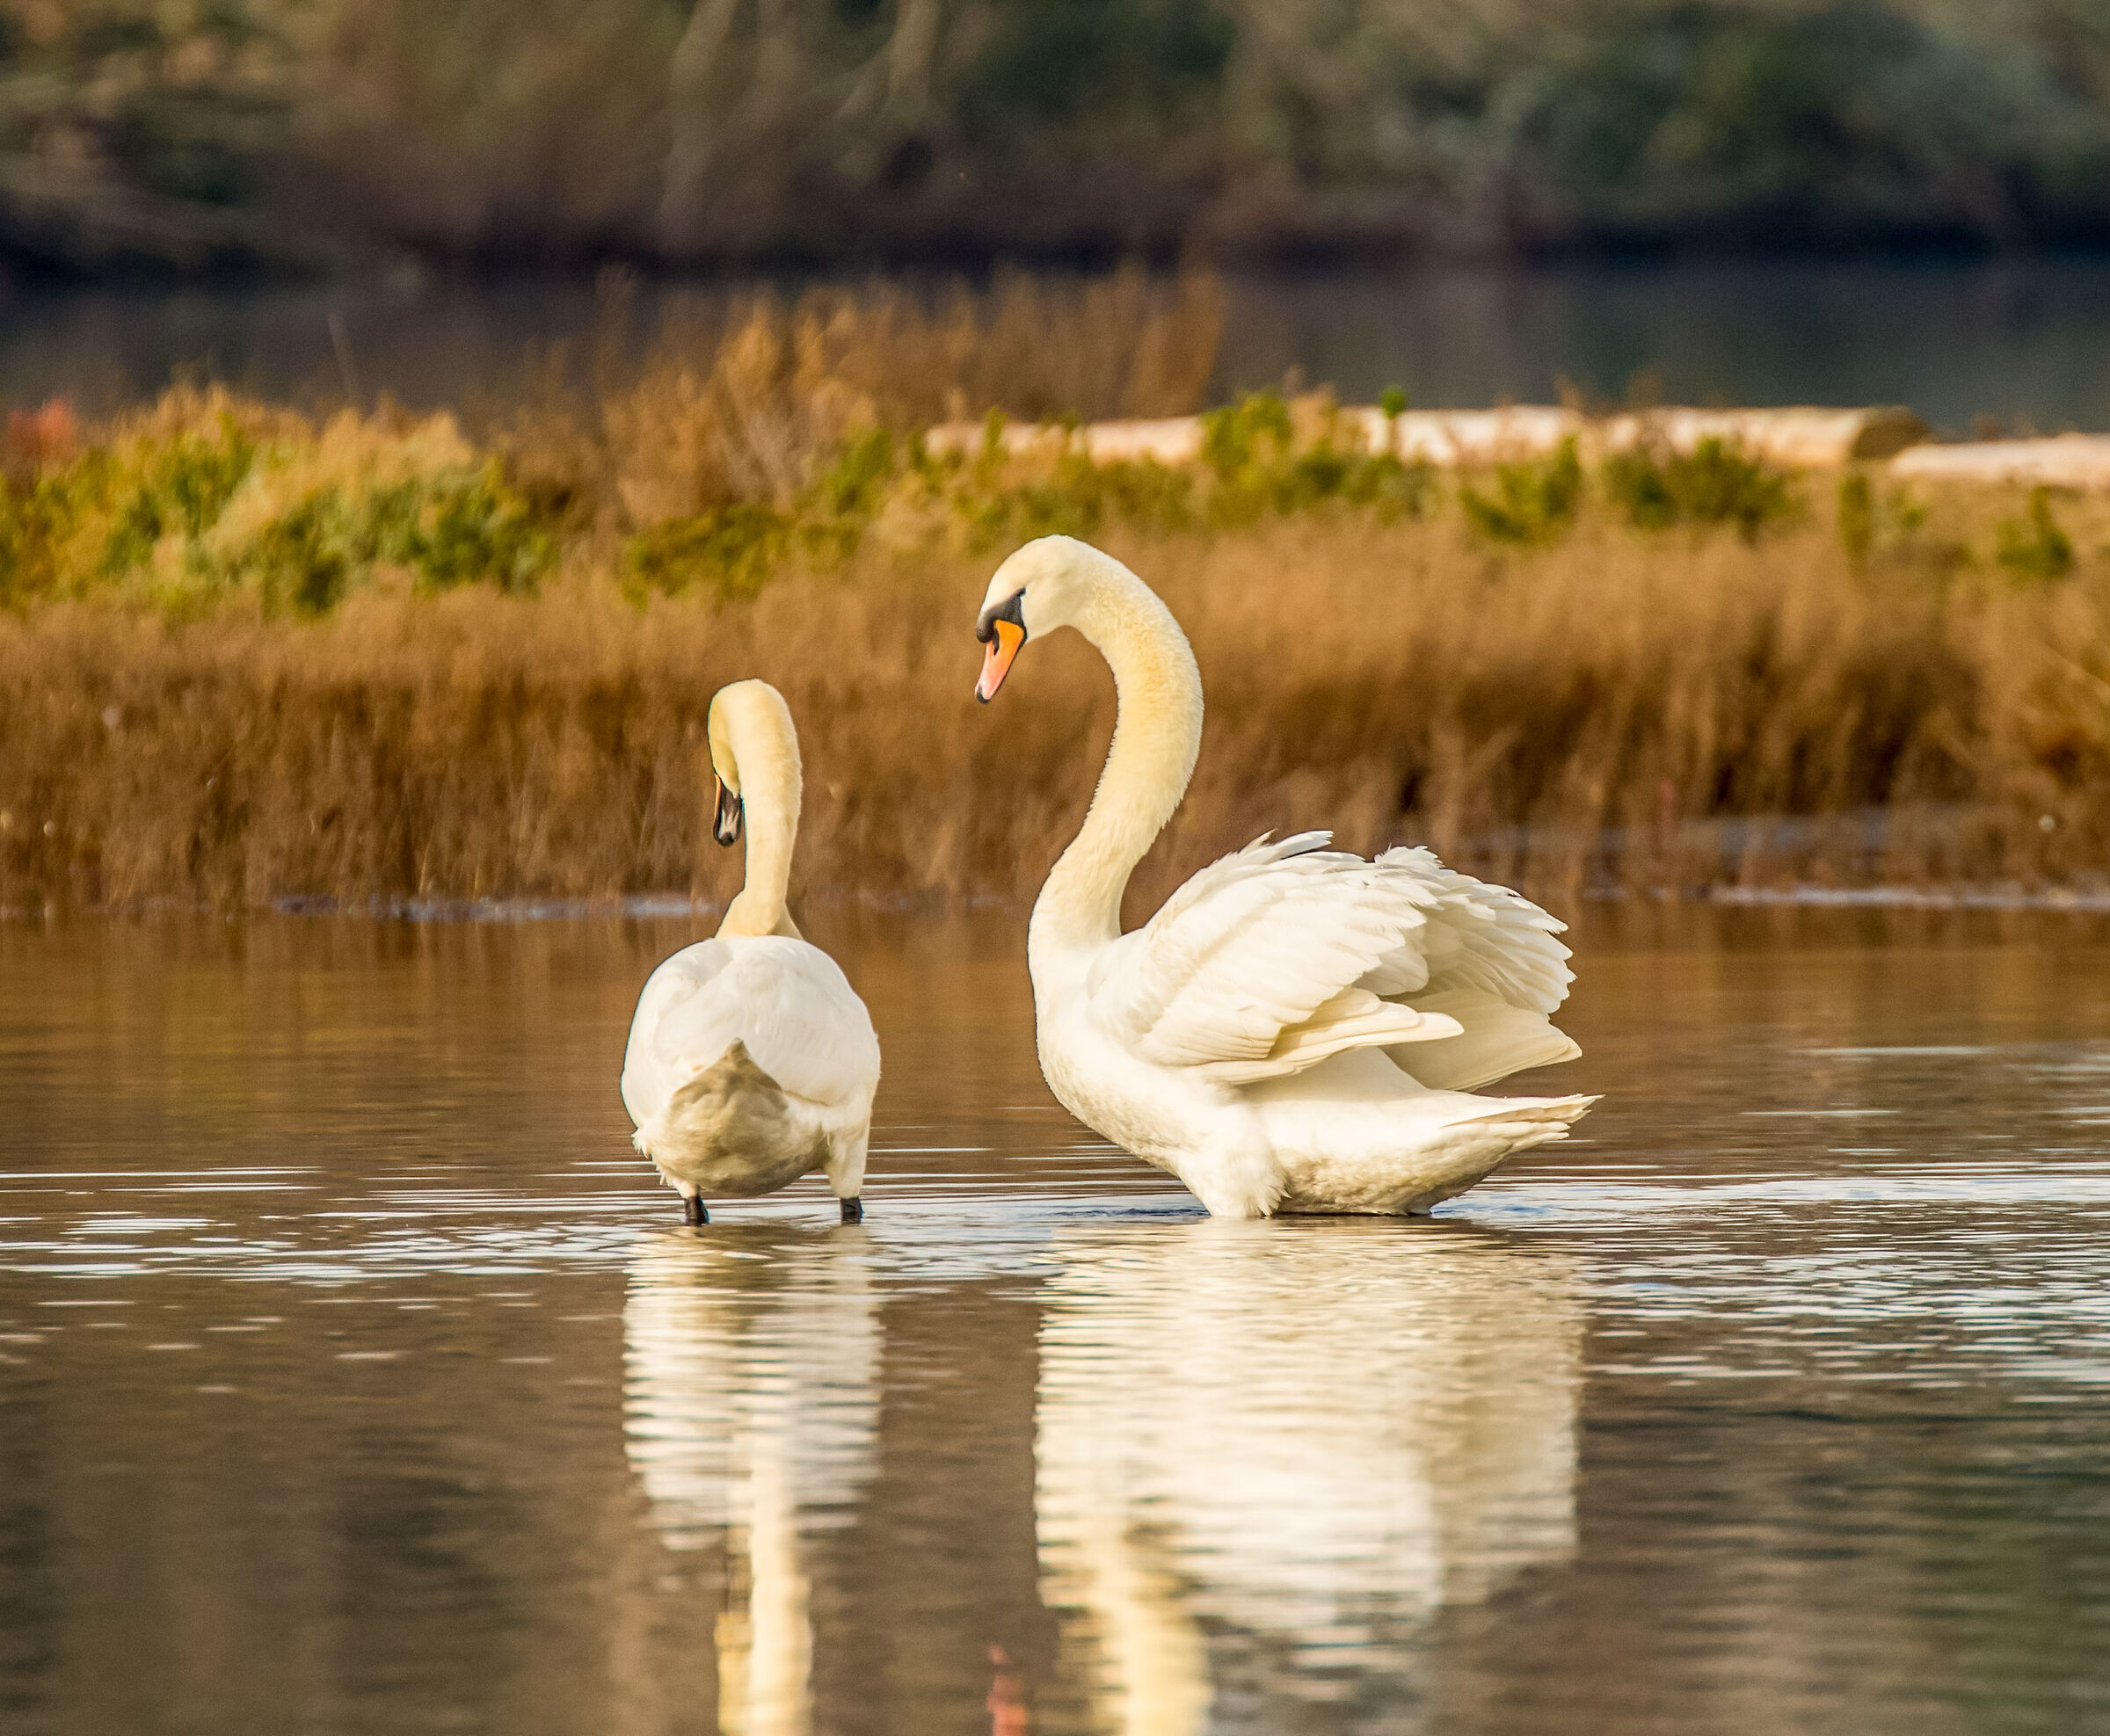 Swans canon 1dx sigma 120-300mm f2.8 ...